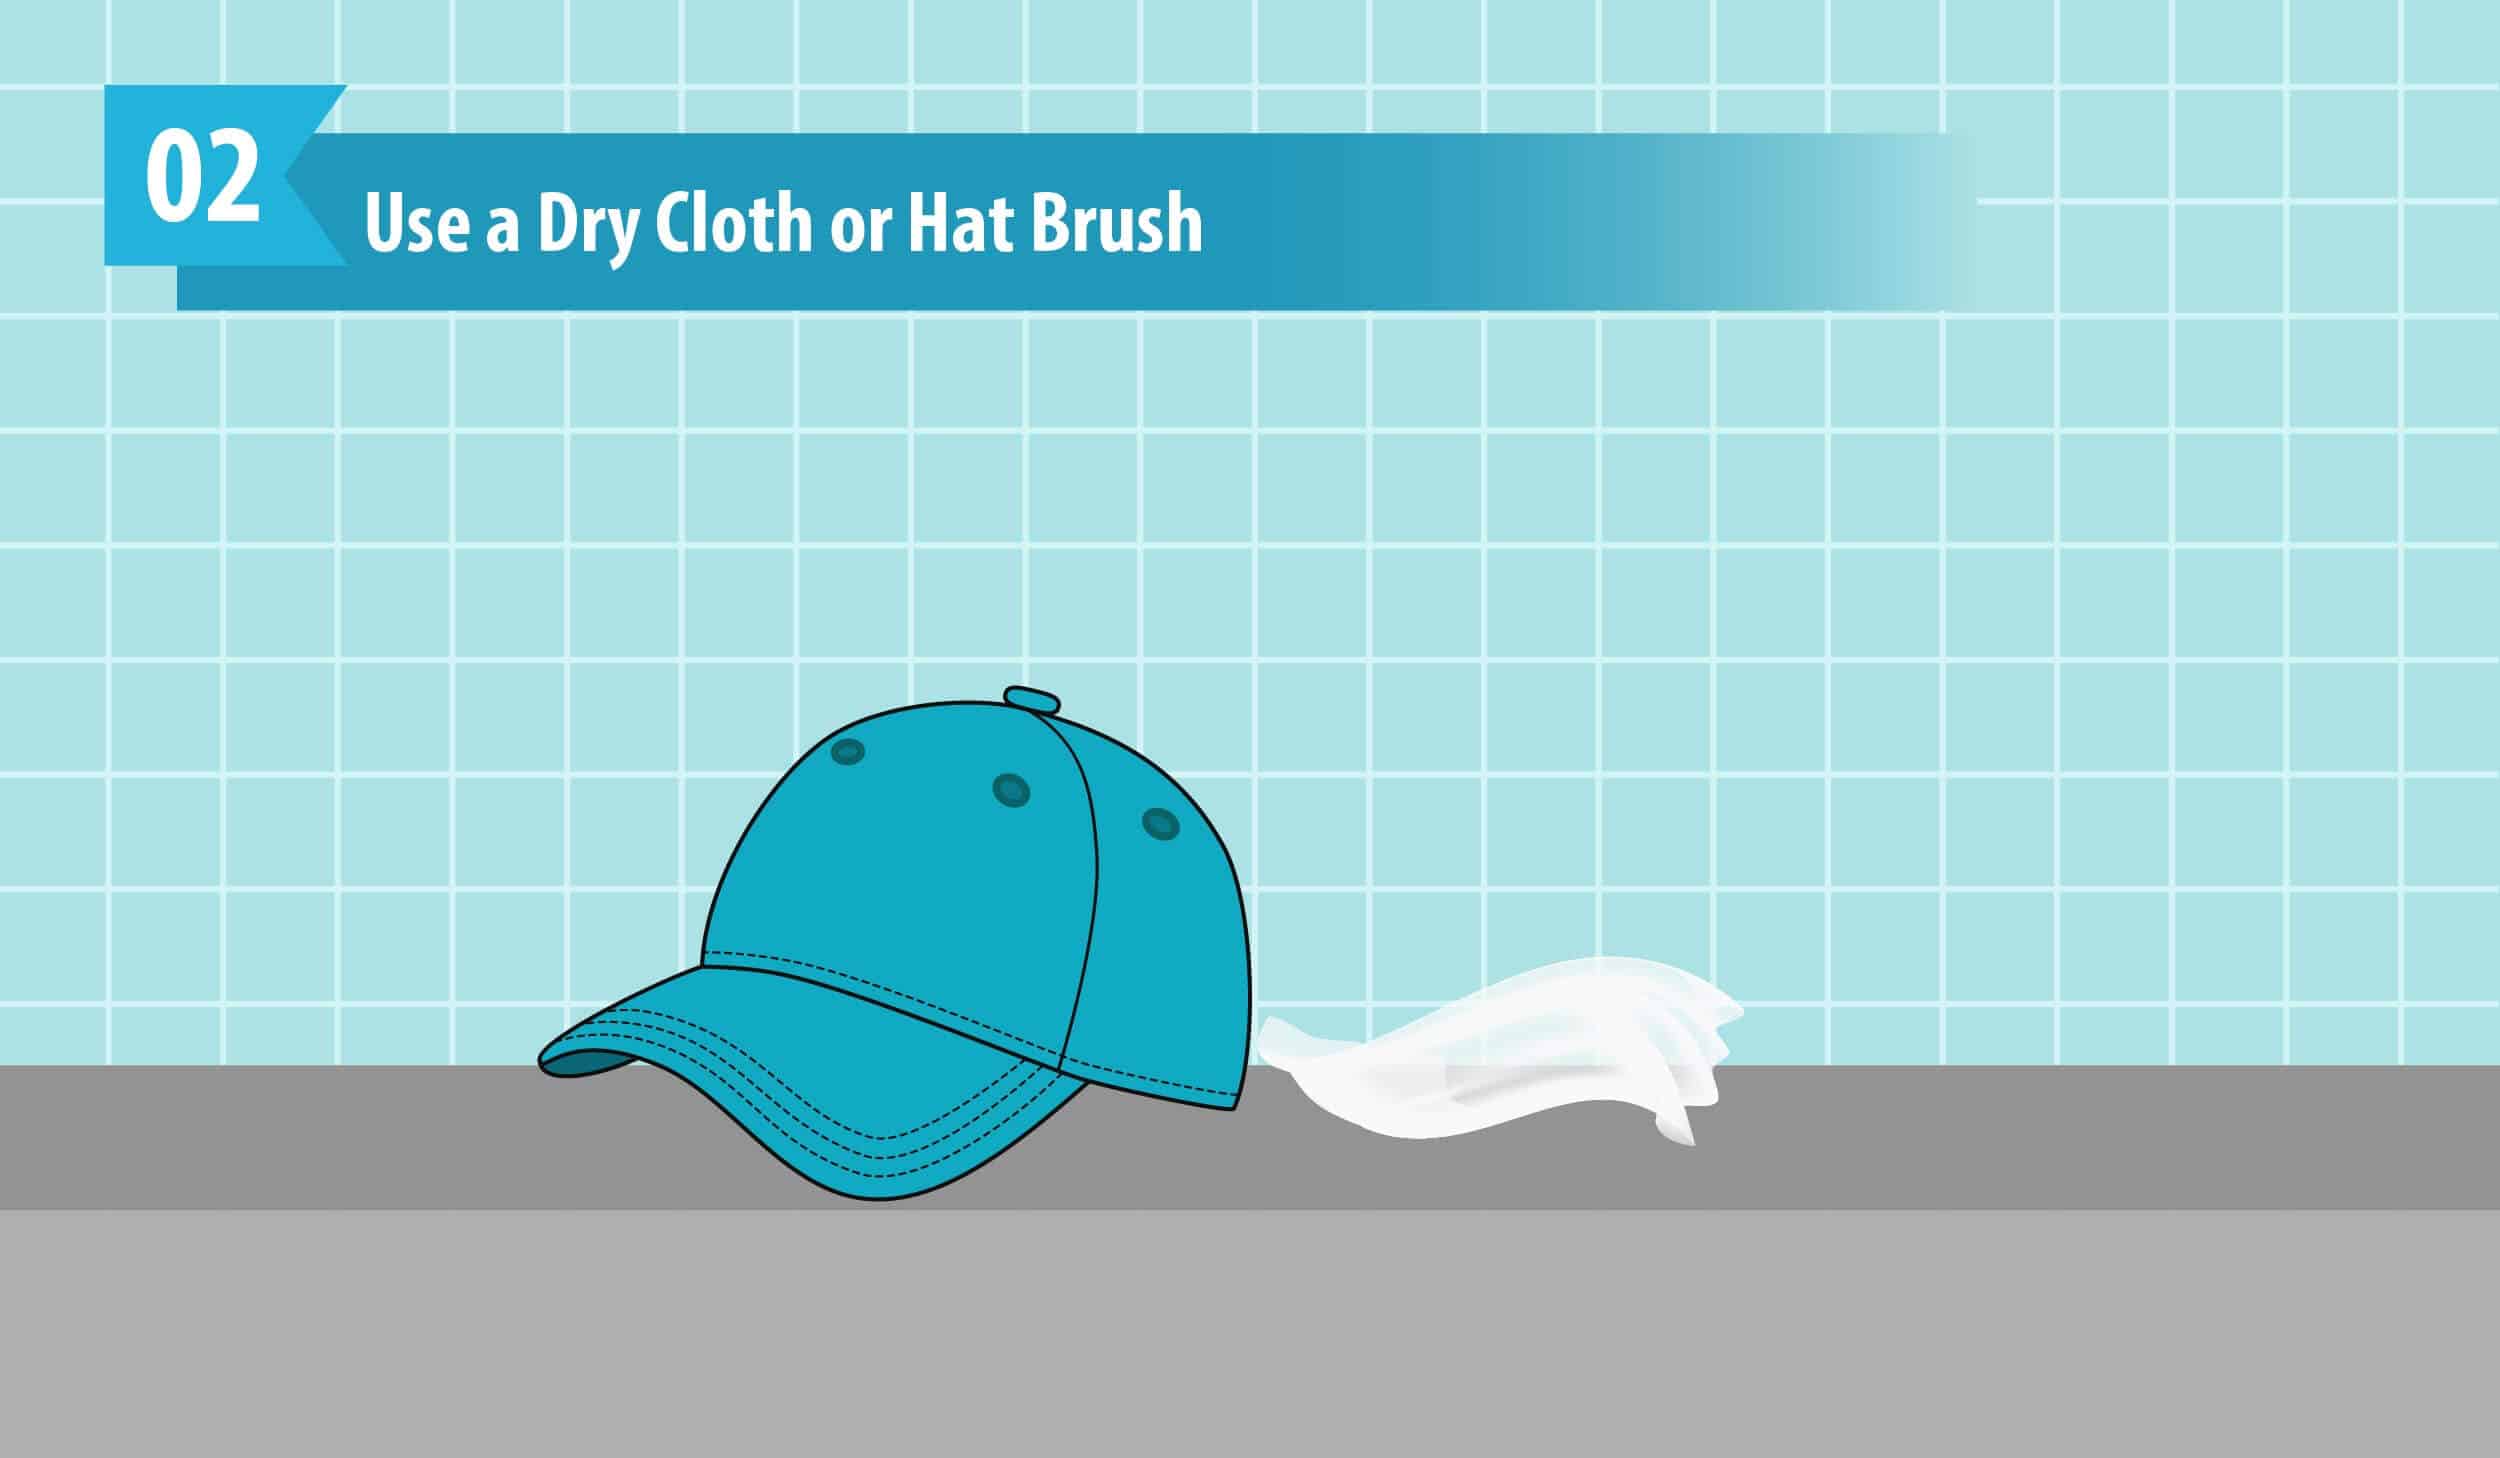 Use a Dry Cloth or Hat Brush